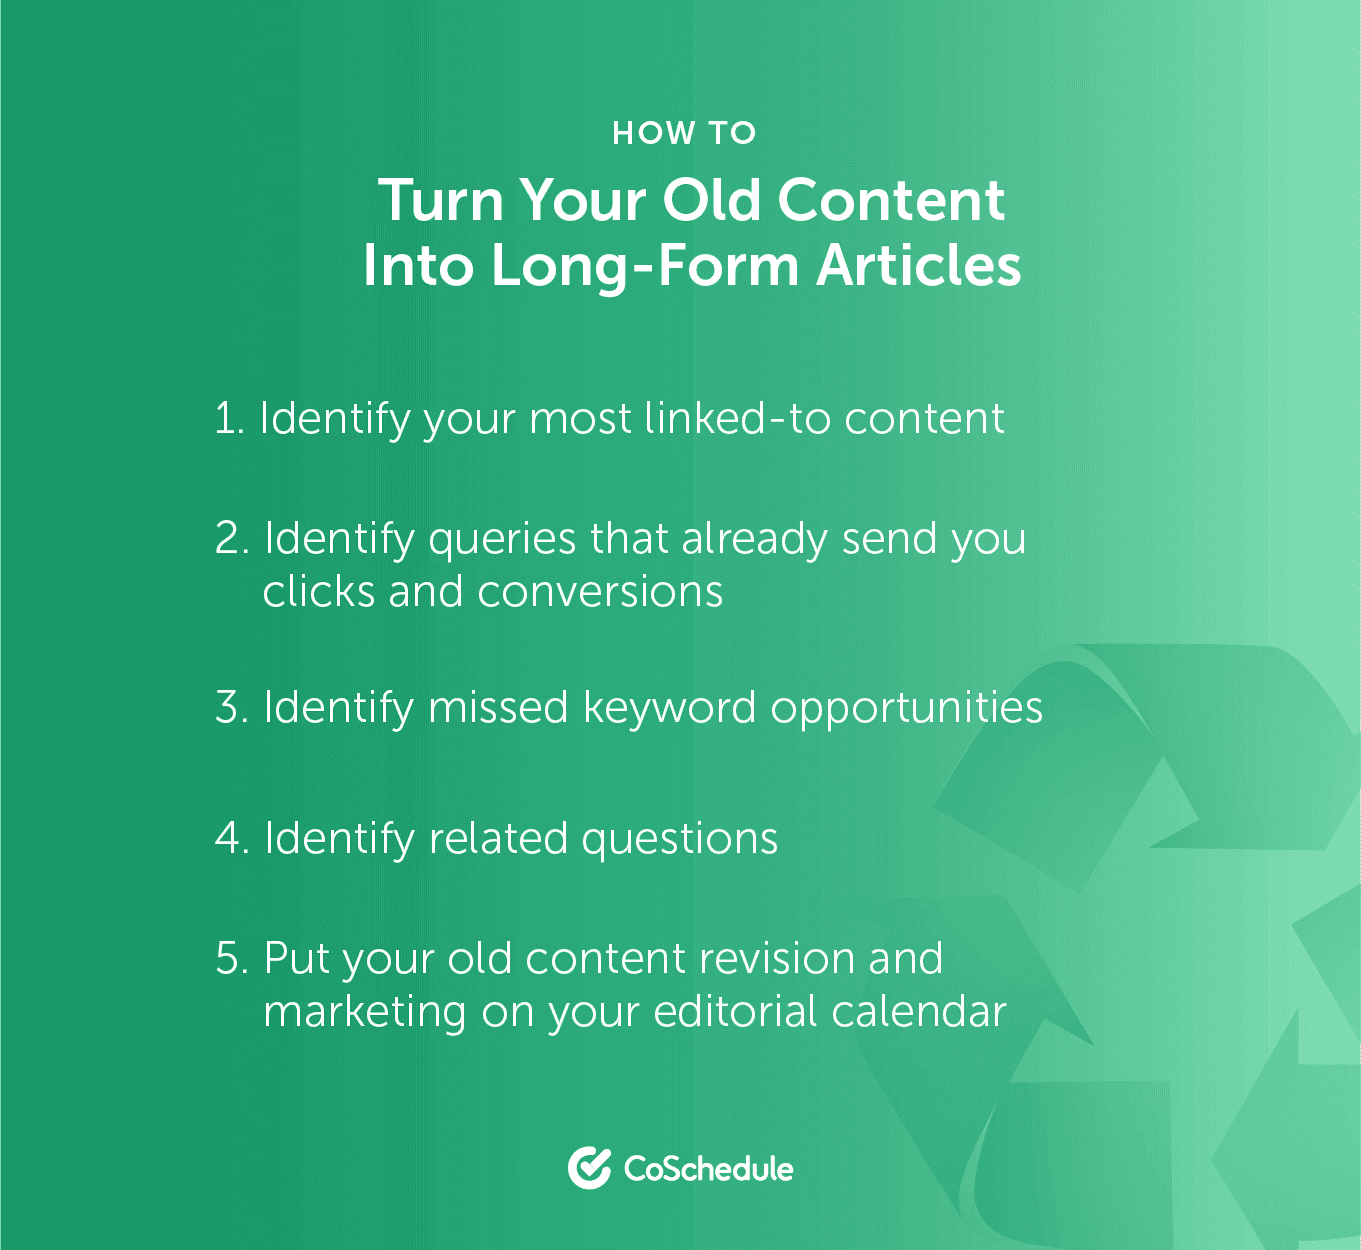 Steps to create long-form articles from old content graphic